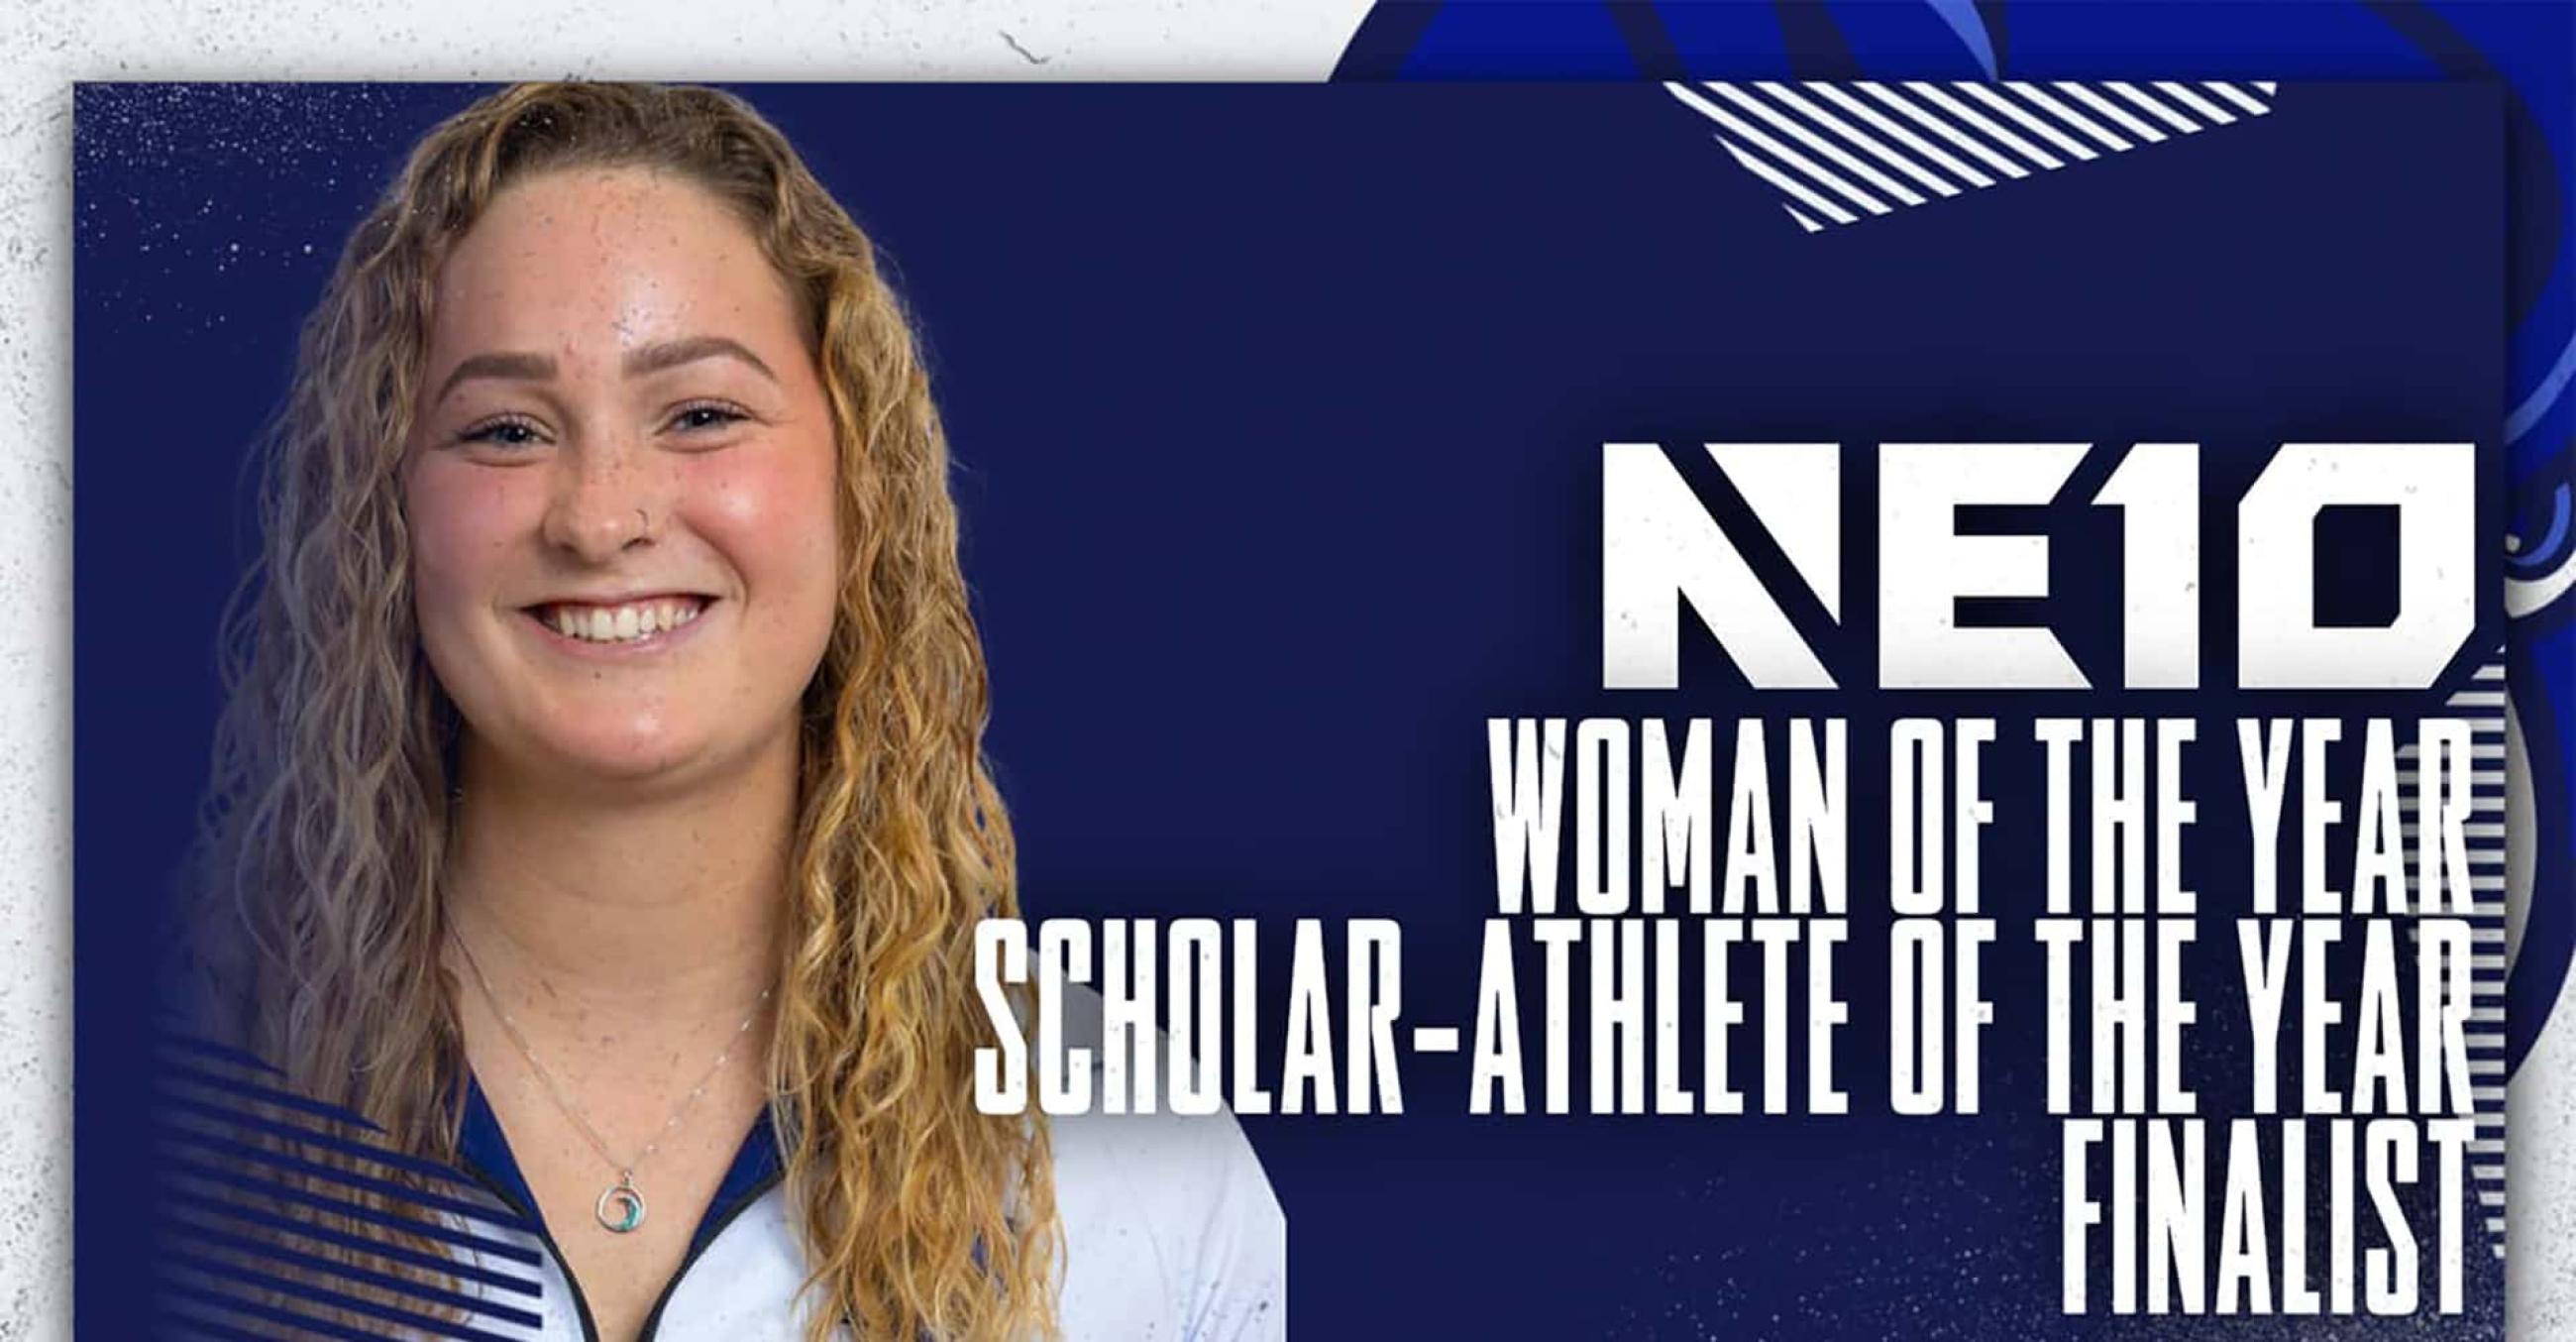 A head shot of Olivia Strelevitz with the text: "NE 10 Woman of the Year, Scholar-Athlete of the Year Finalist"